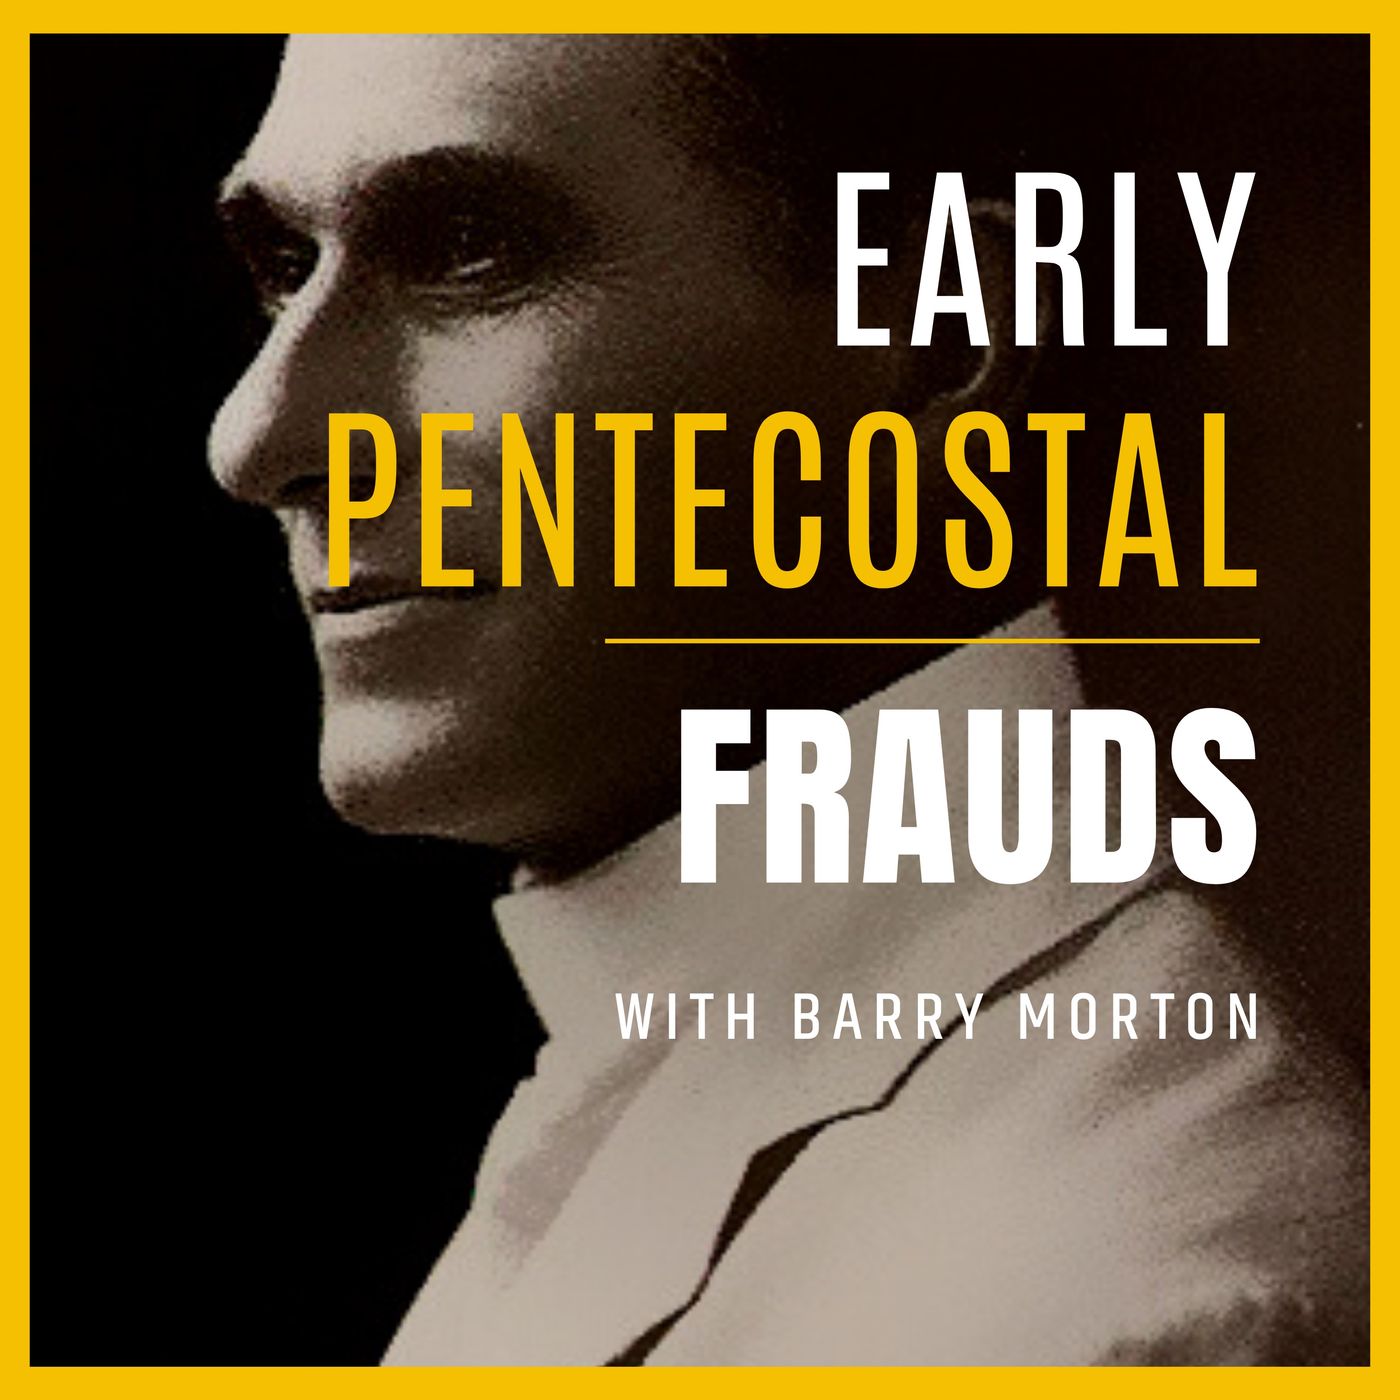 Early Pentecostal Frauds: With Barry Morton